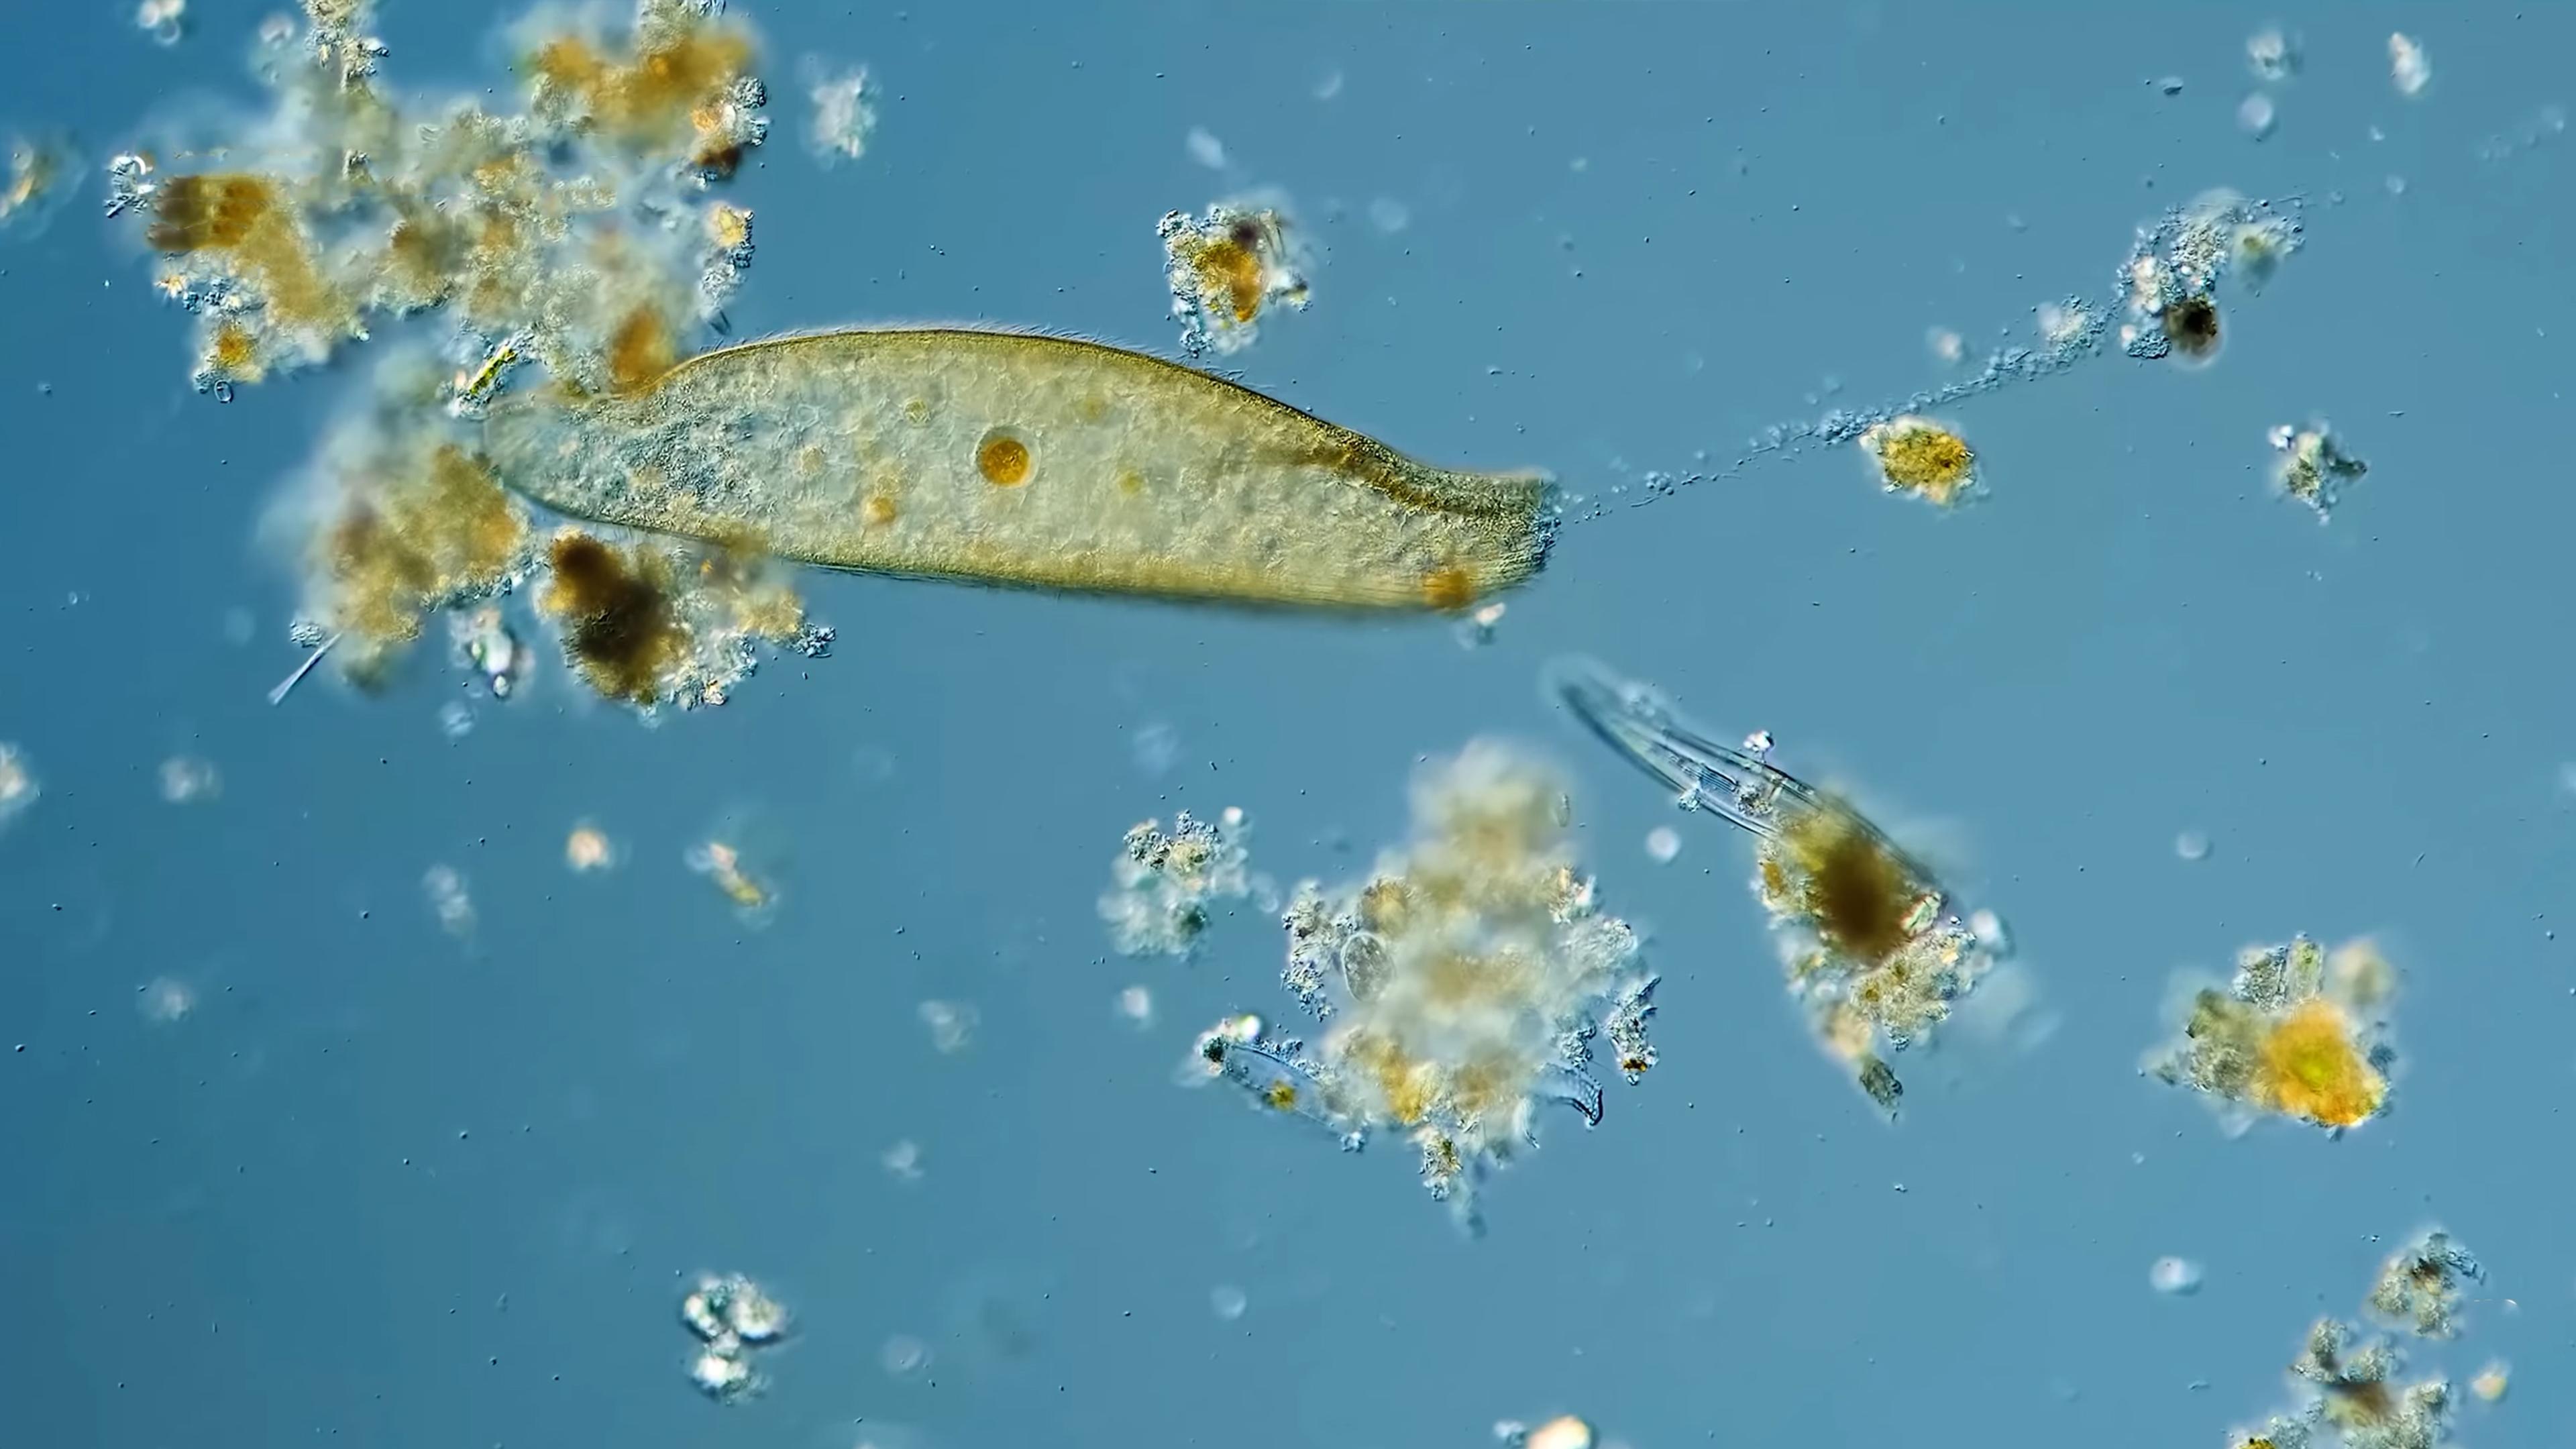 Microscopic view of various microorganisms and particles in a blue liquid, showing a large oval-shaped microorganism amidst smaller particles.